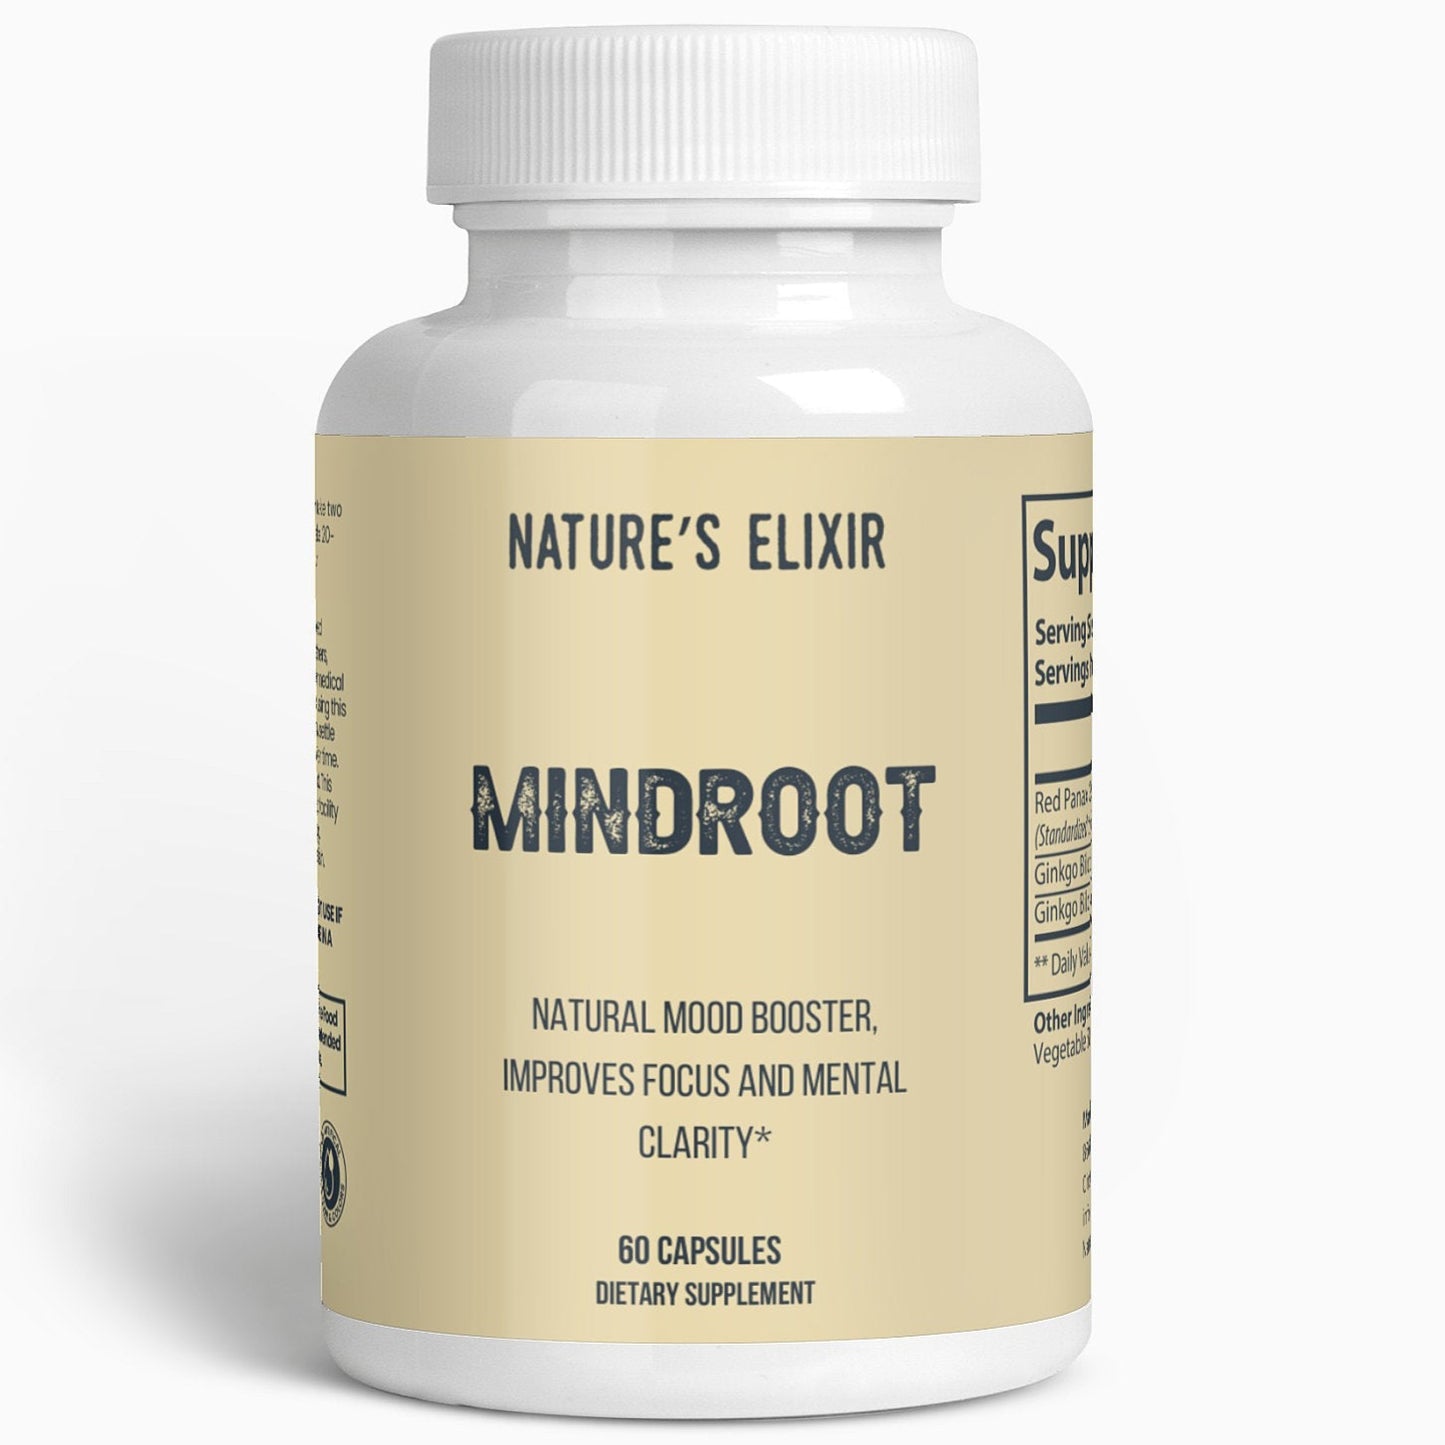 Mindroot